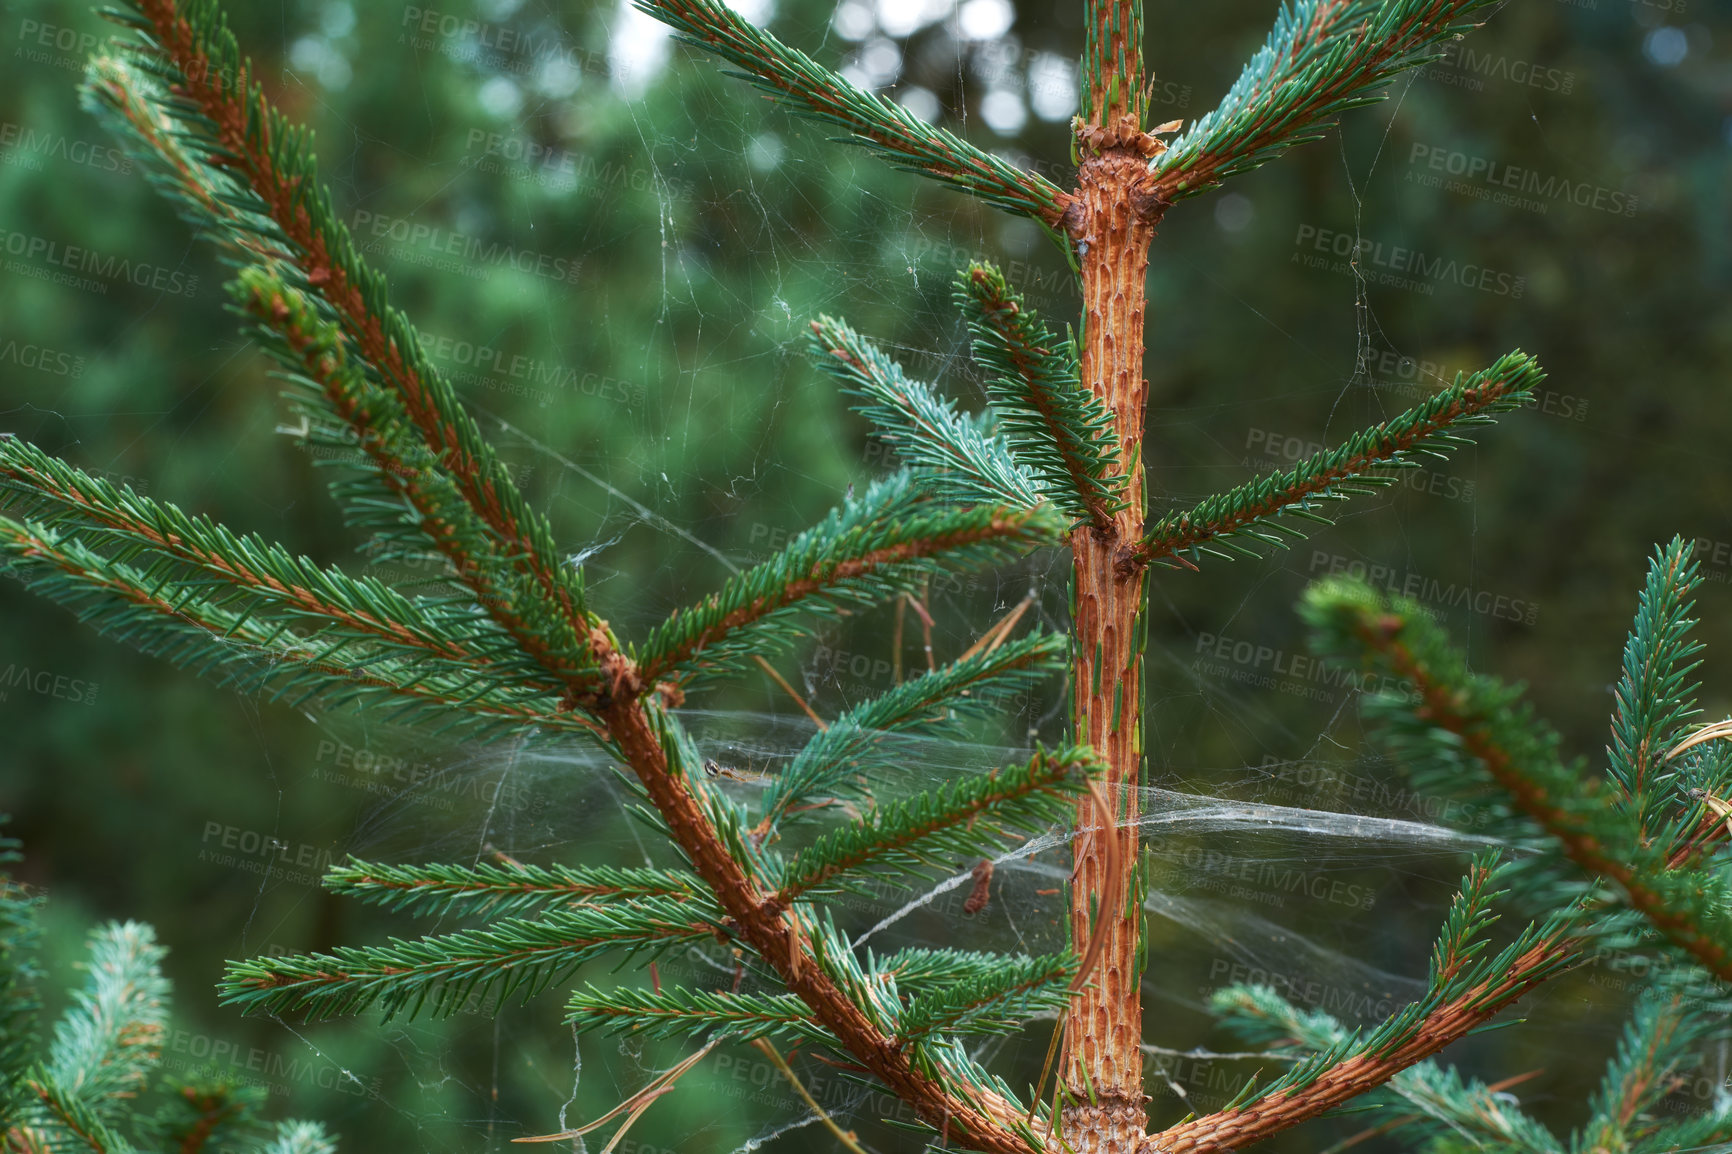 Buy stock photo Closeup of a pine tree with webs between the branches in a wild forest. Green vegetation with cobwebs growing in untouched nature in a secluded, uncultivated environment on a bright and beautiful day